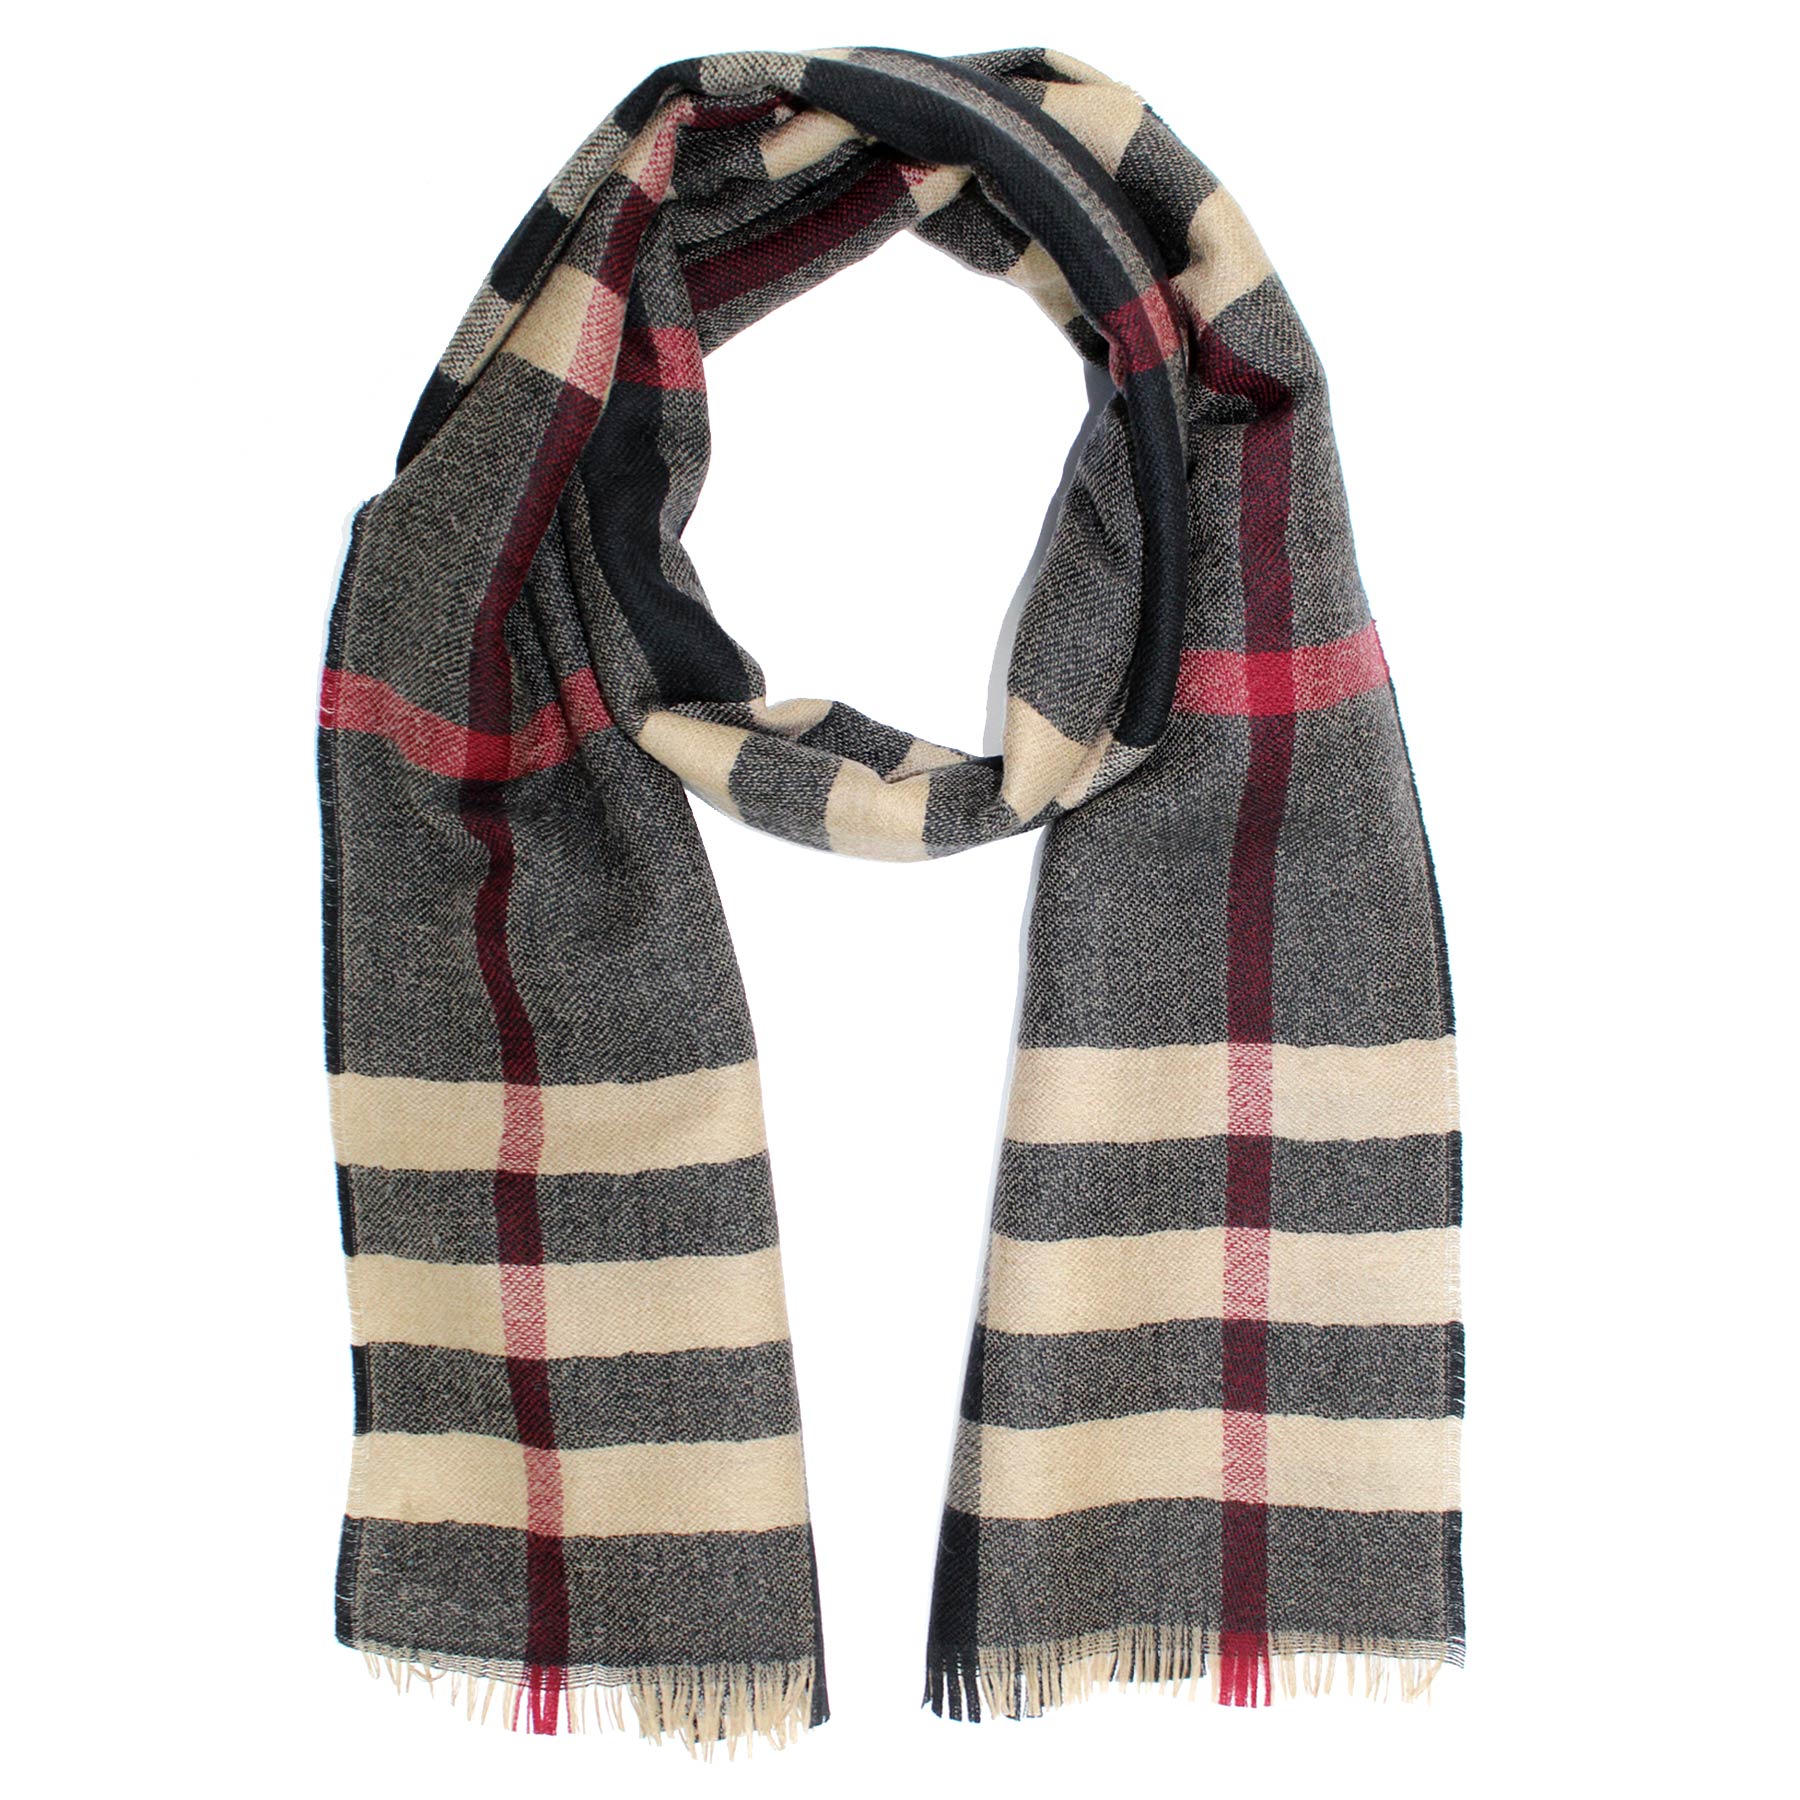 Hilsen mærke Observation Burberry Scarf Signature Check - Wool Shawl Made In Italy SALE - Como Milano